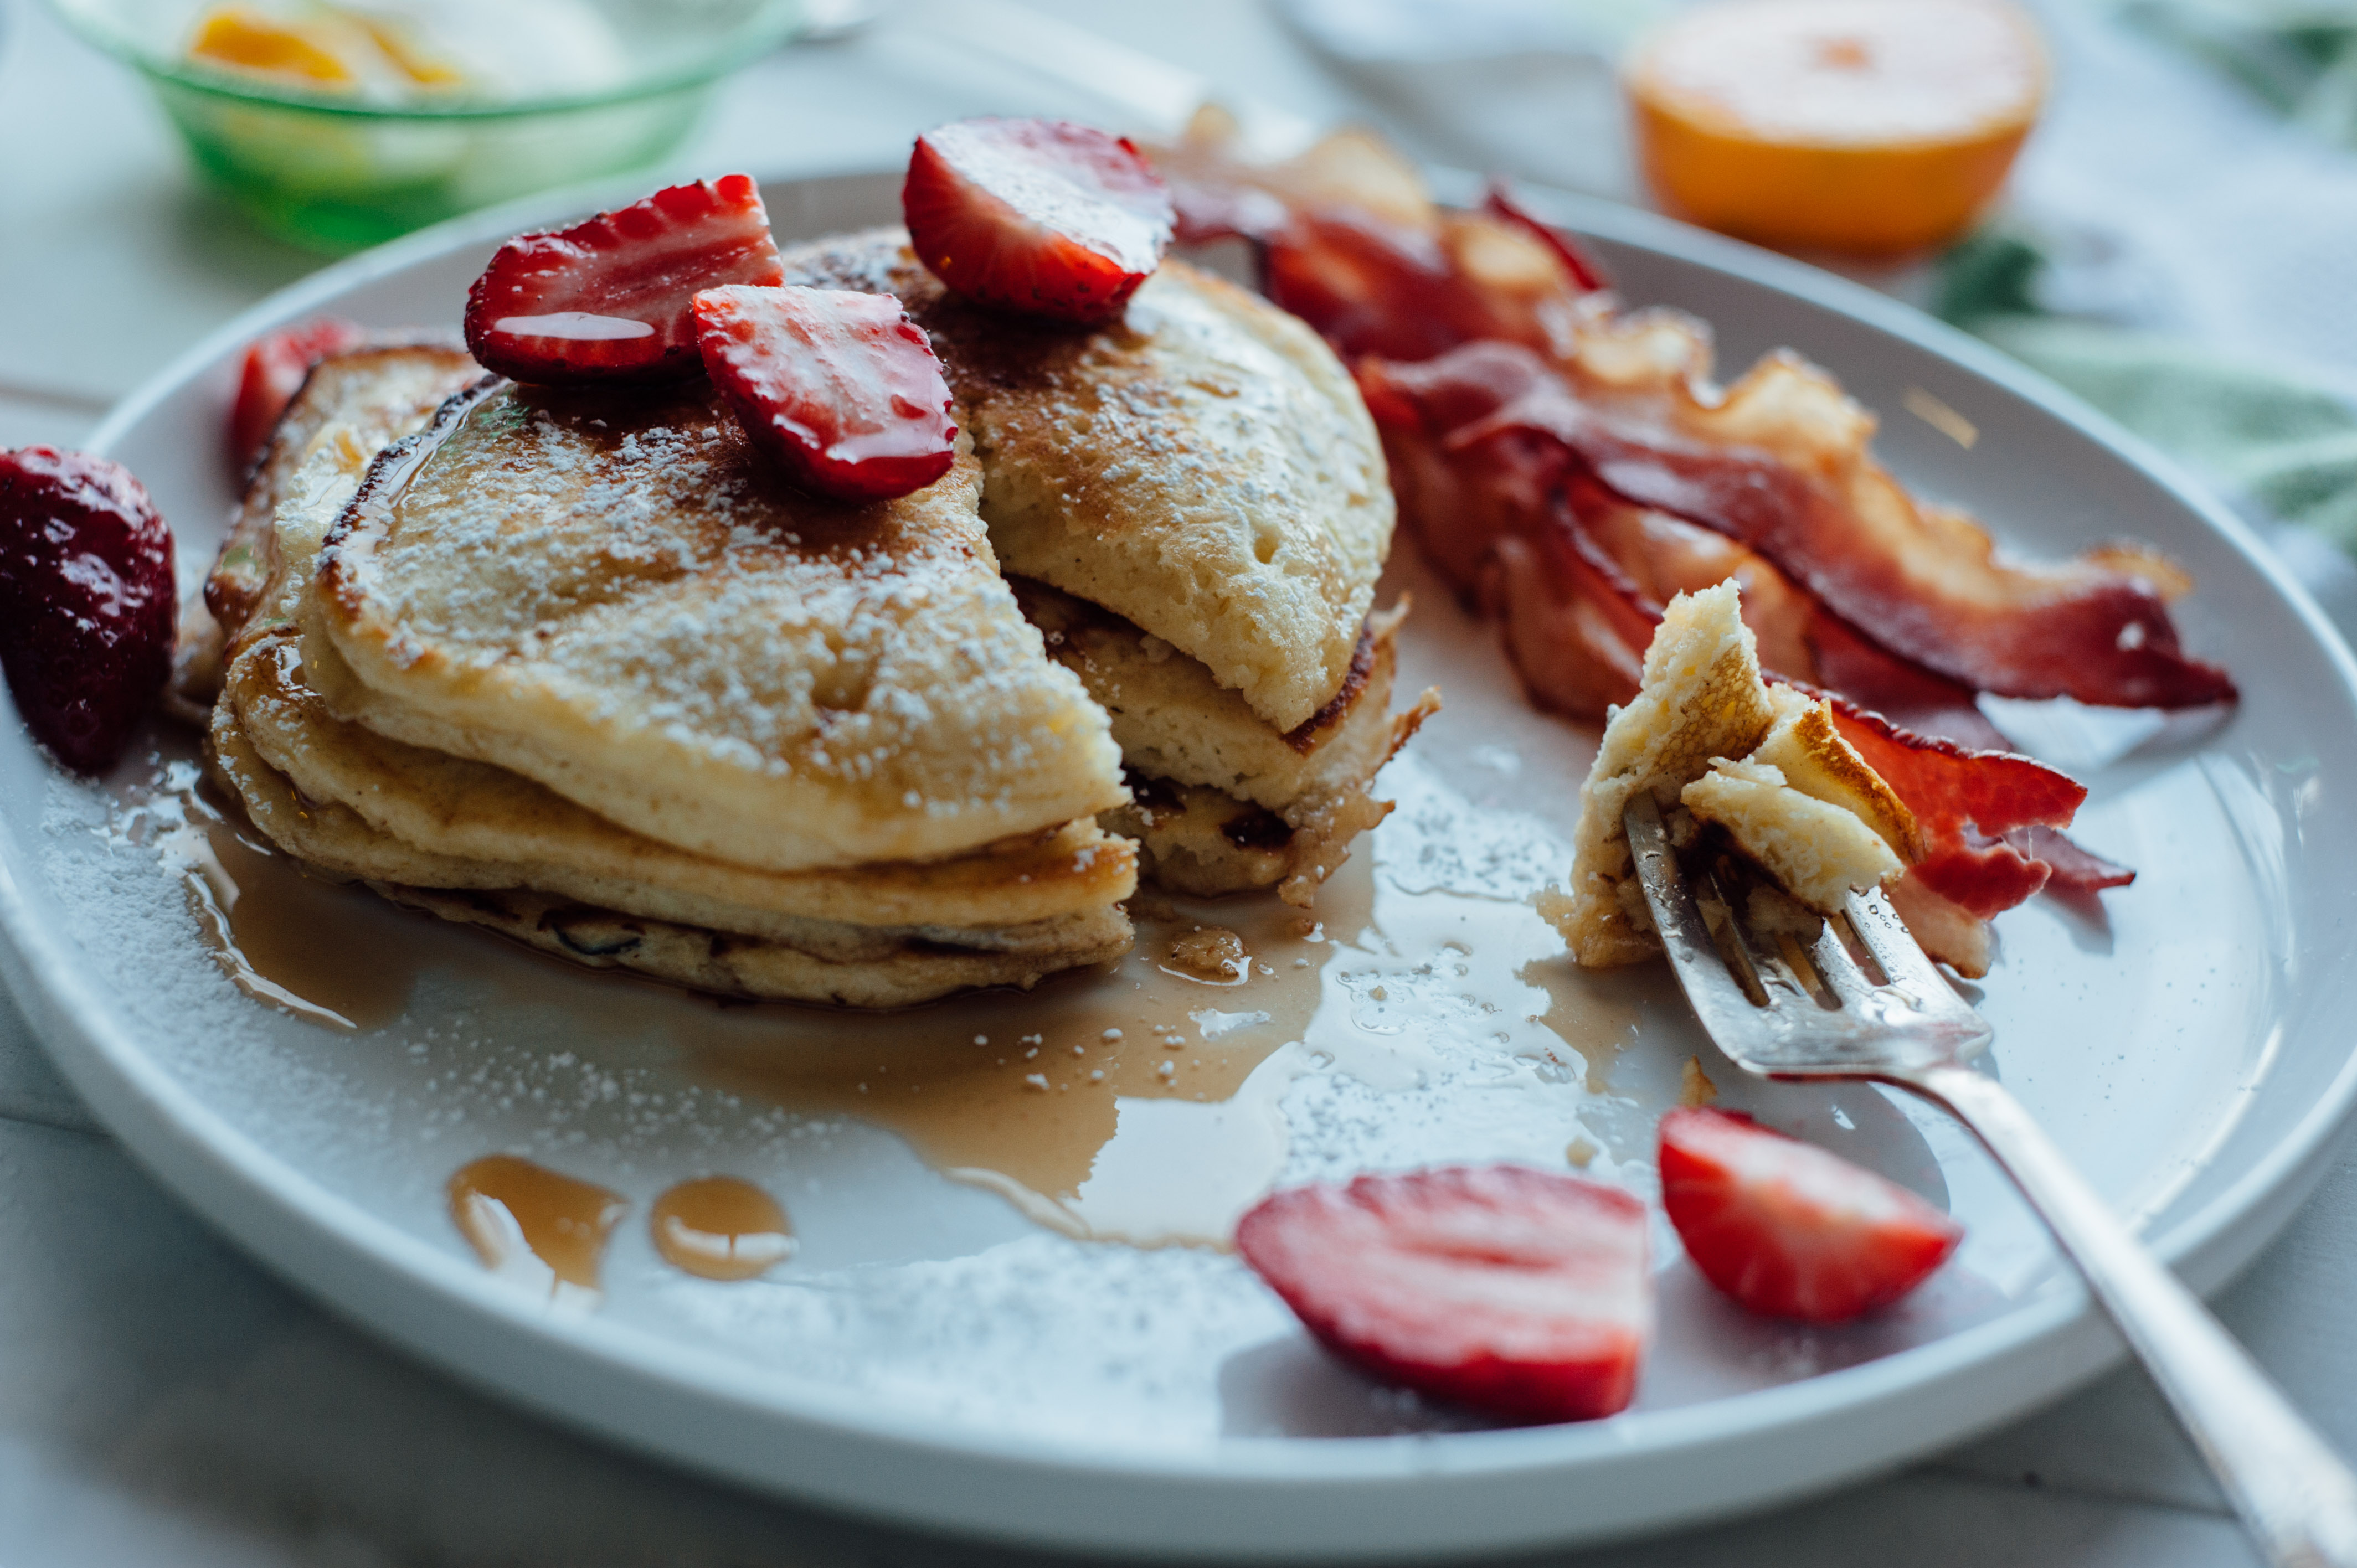 My pancakes  dream repeat buttermilk  make buttermilk to make favorite pancakes with how